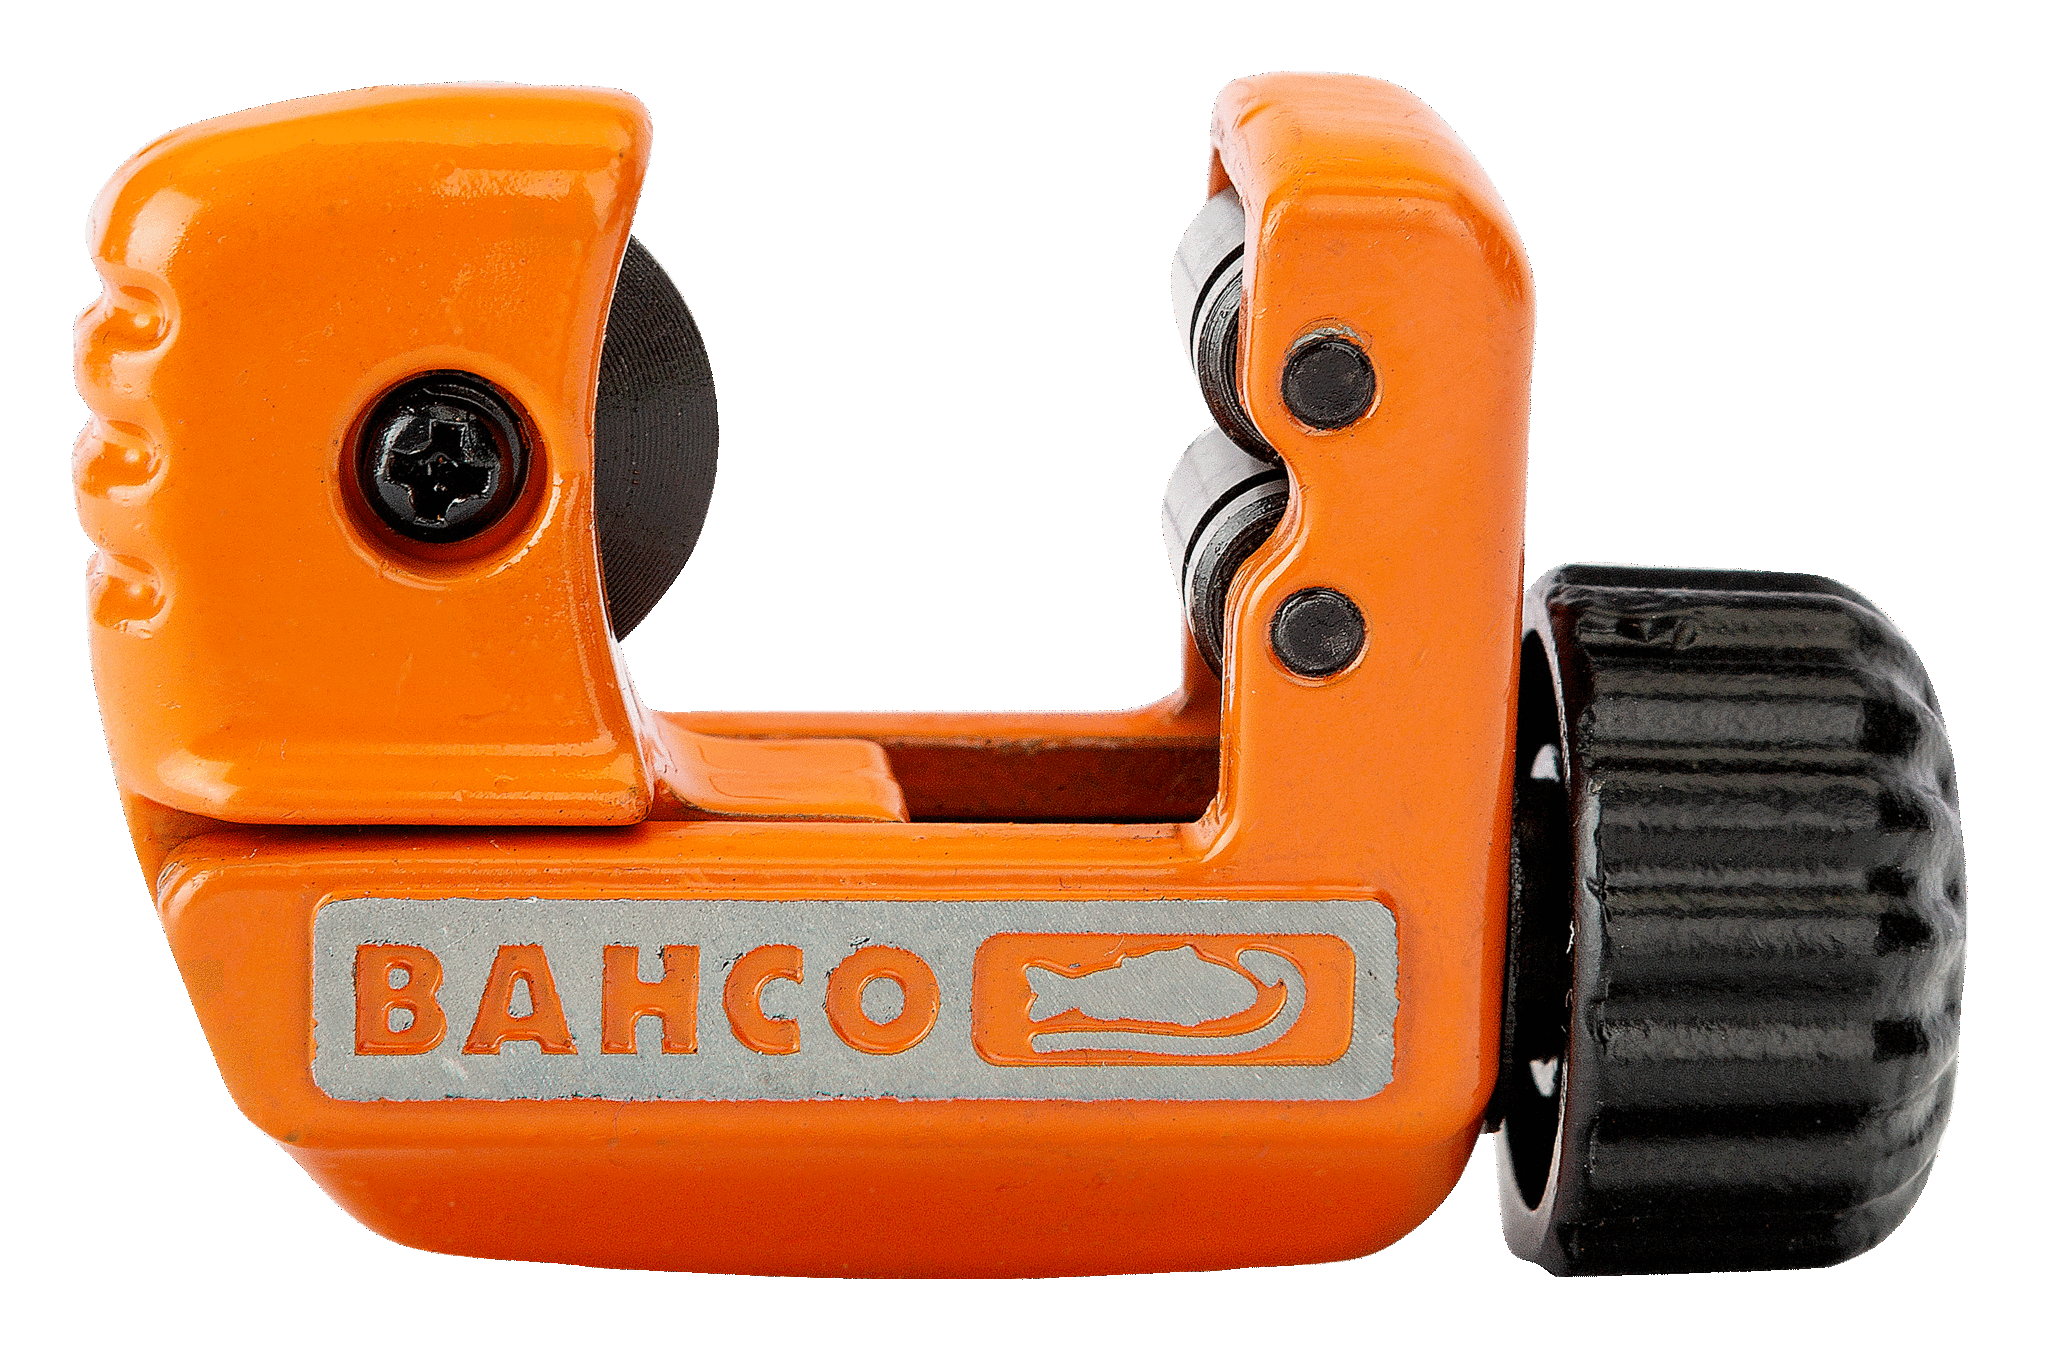 Compact Tube Cutter 3-22 mm - 301-22 by Bahco